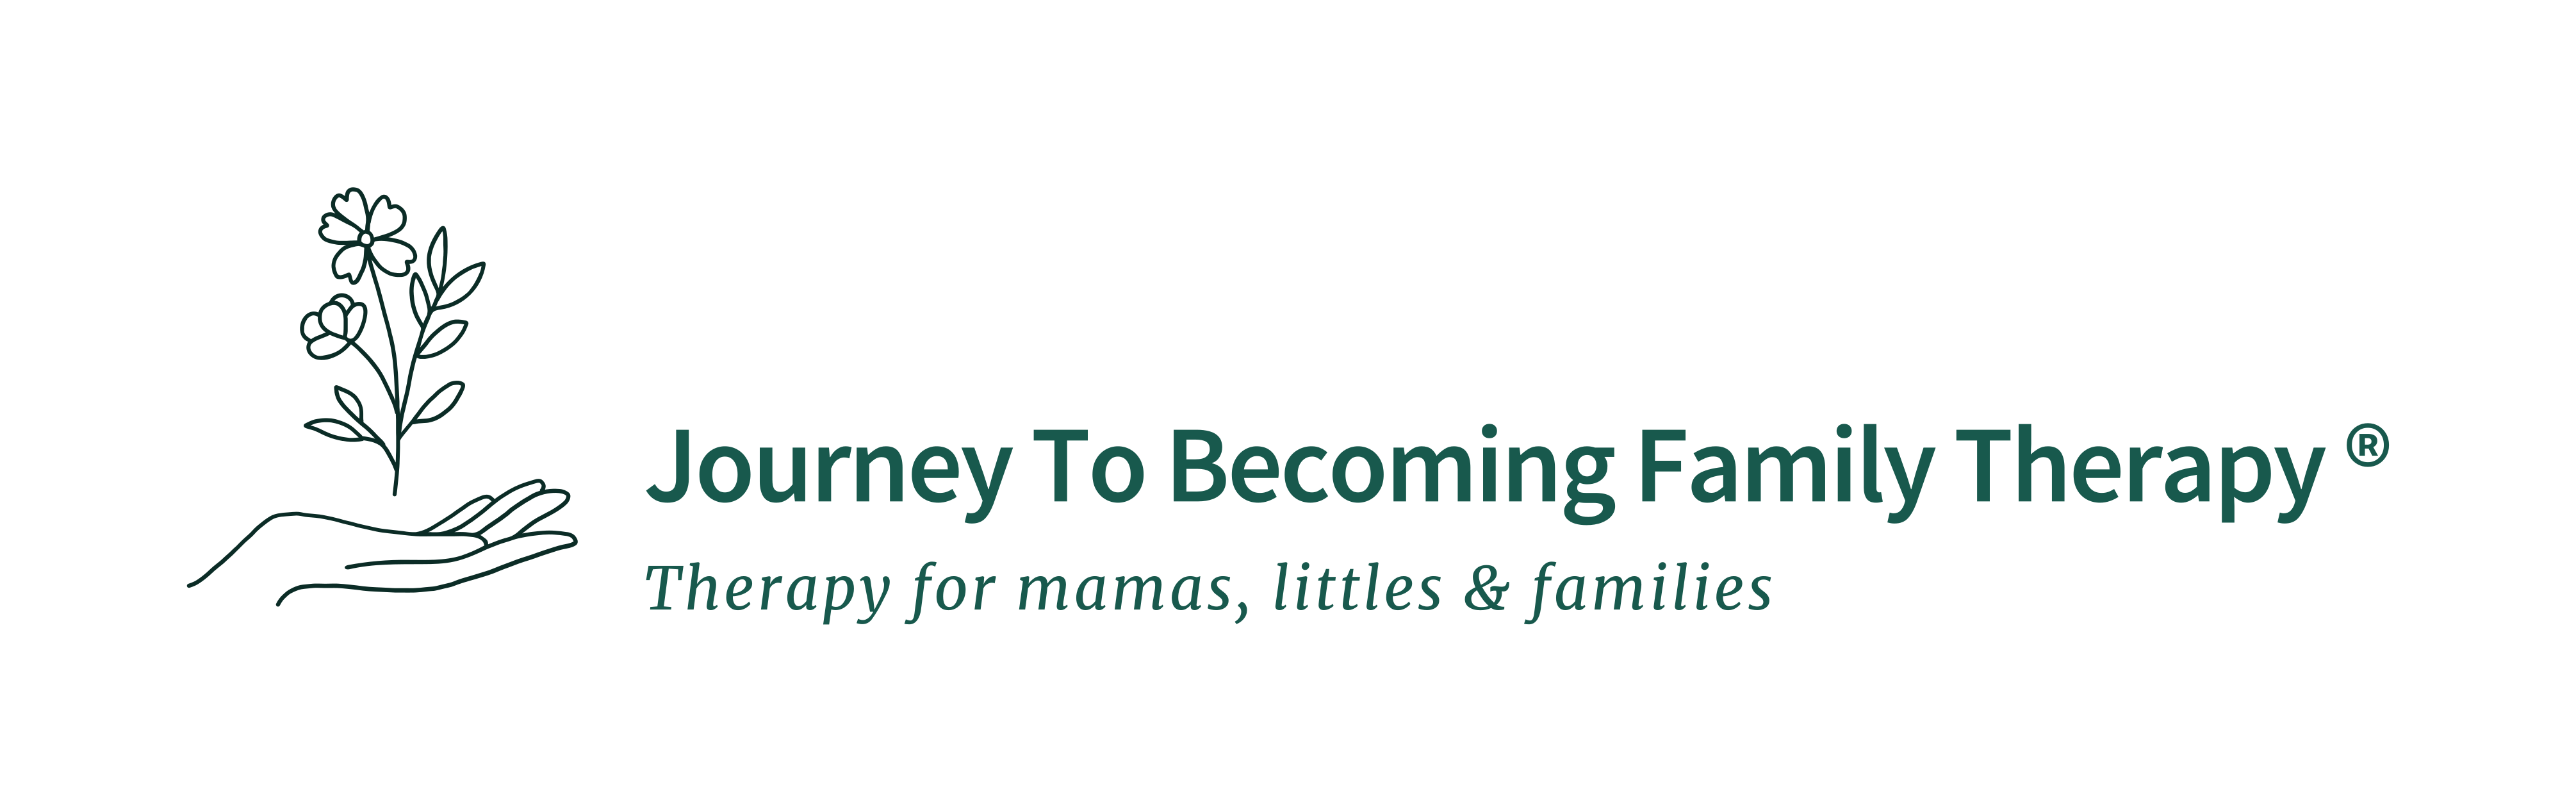 Journey to Becoming Family Therapy